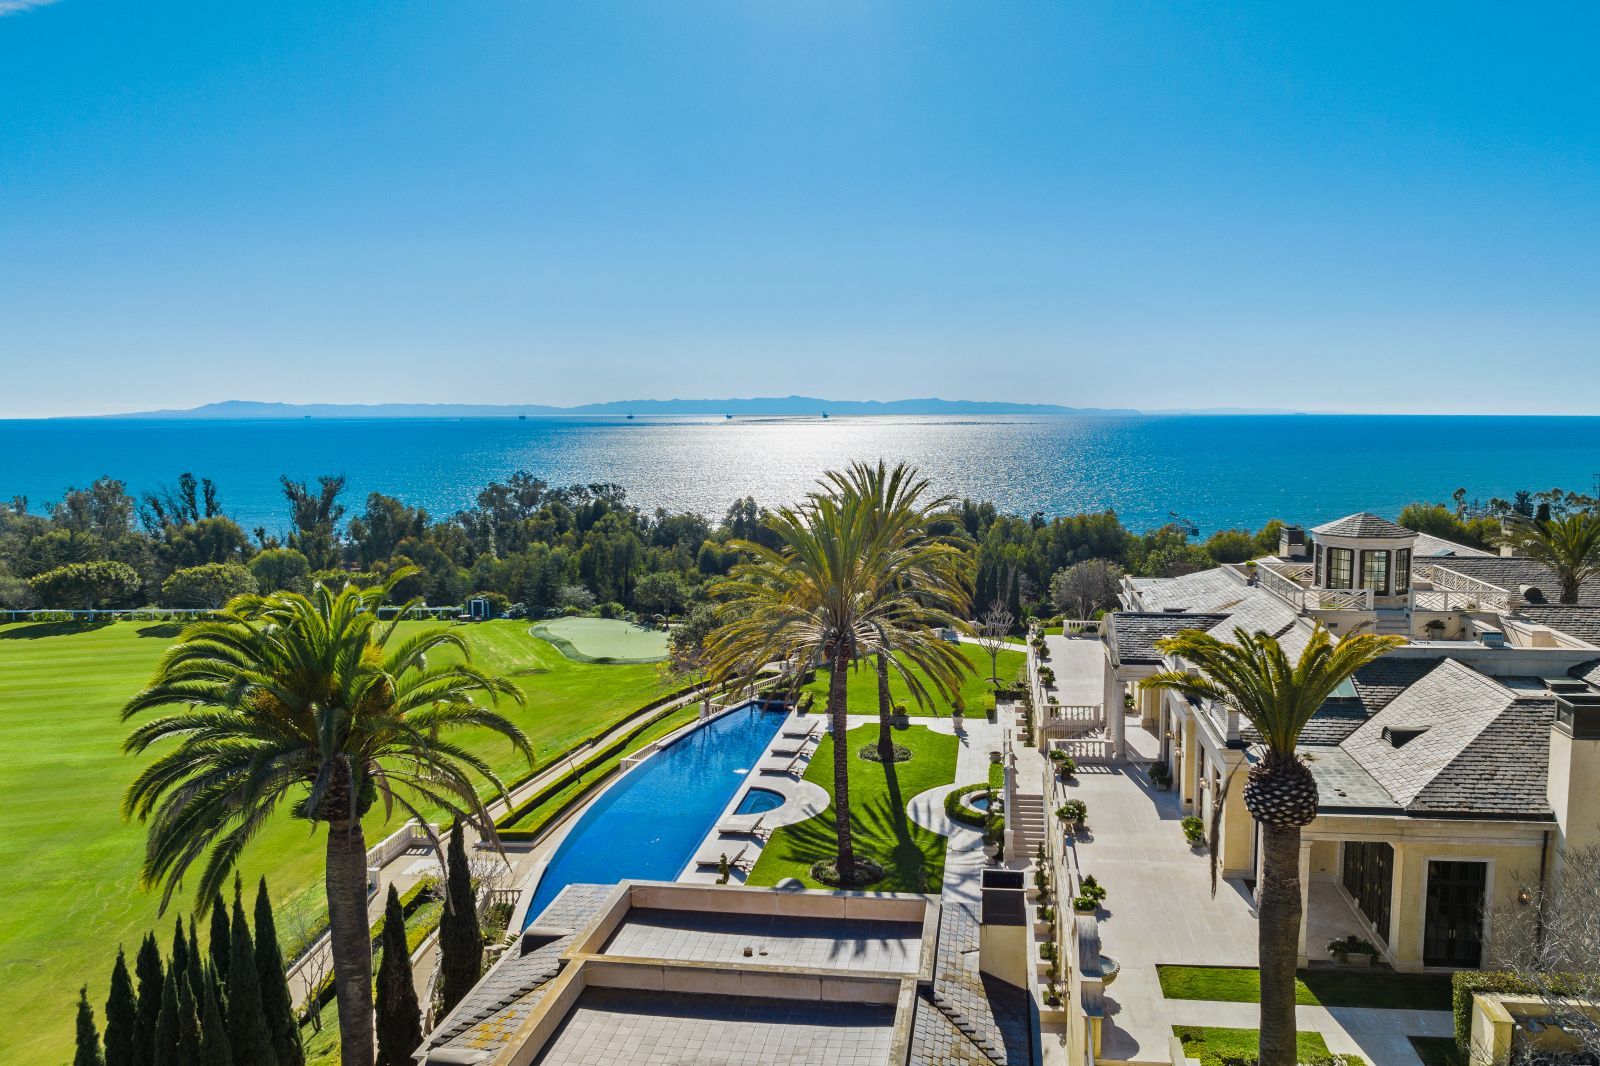 A portion of a polo field, large pool, palm trees, and portion of a massive home, with the sparkling blue Pacific Ocean and blue sky in the background